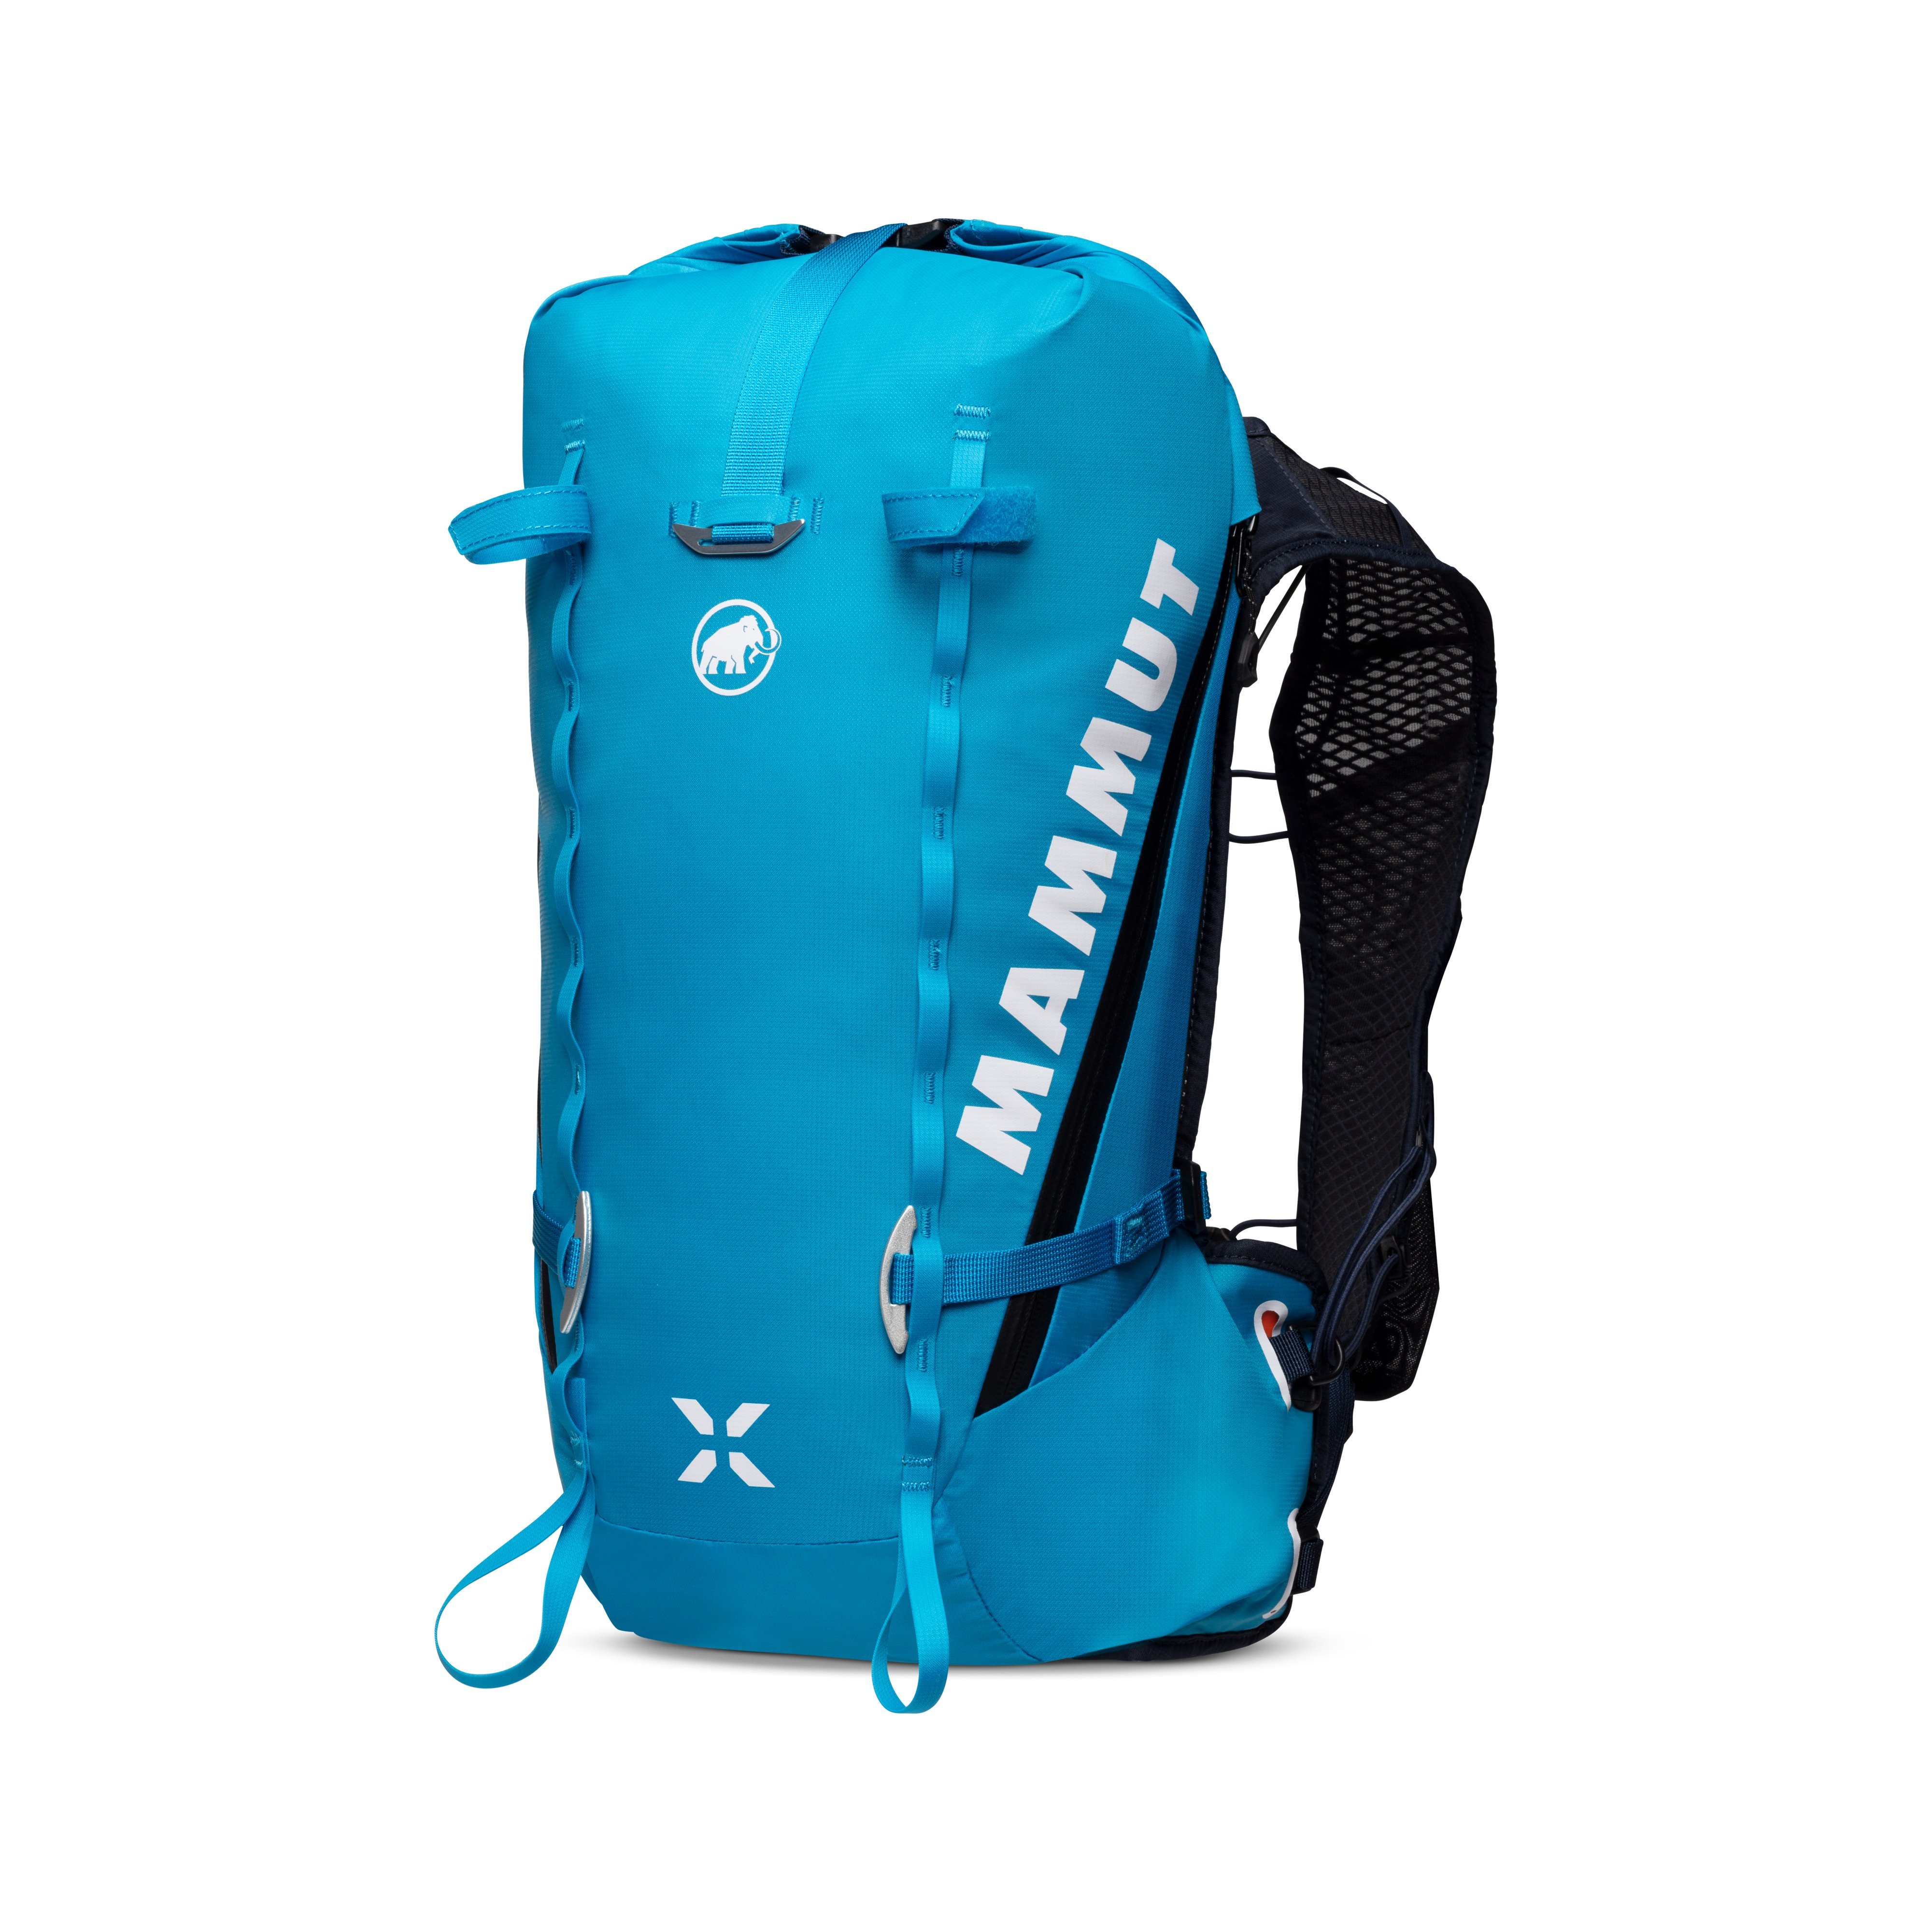 Trion Nordwand 15 - sky-night, 15 L product image